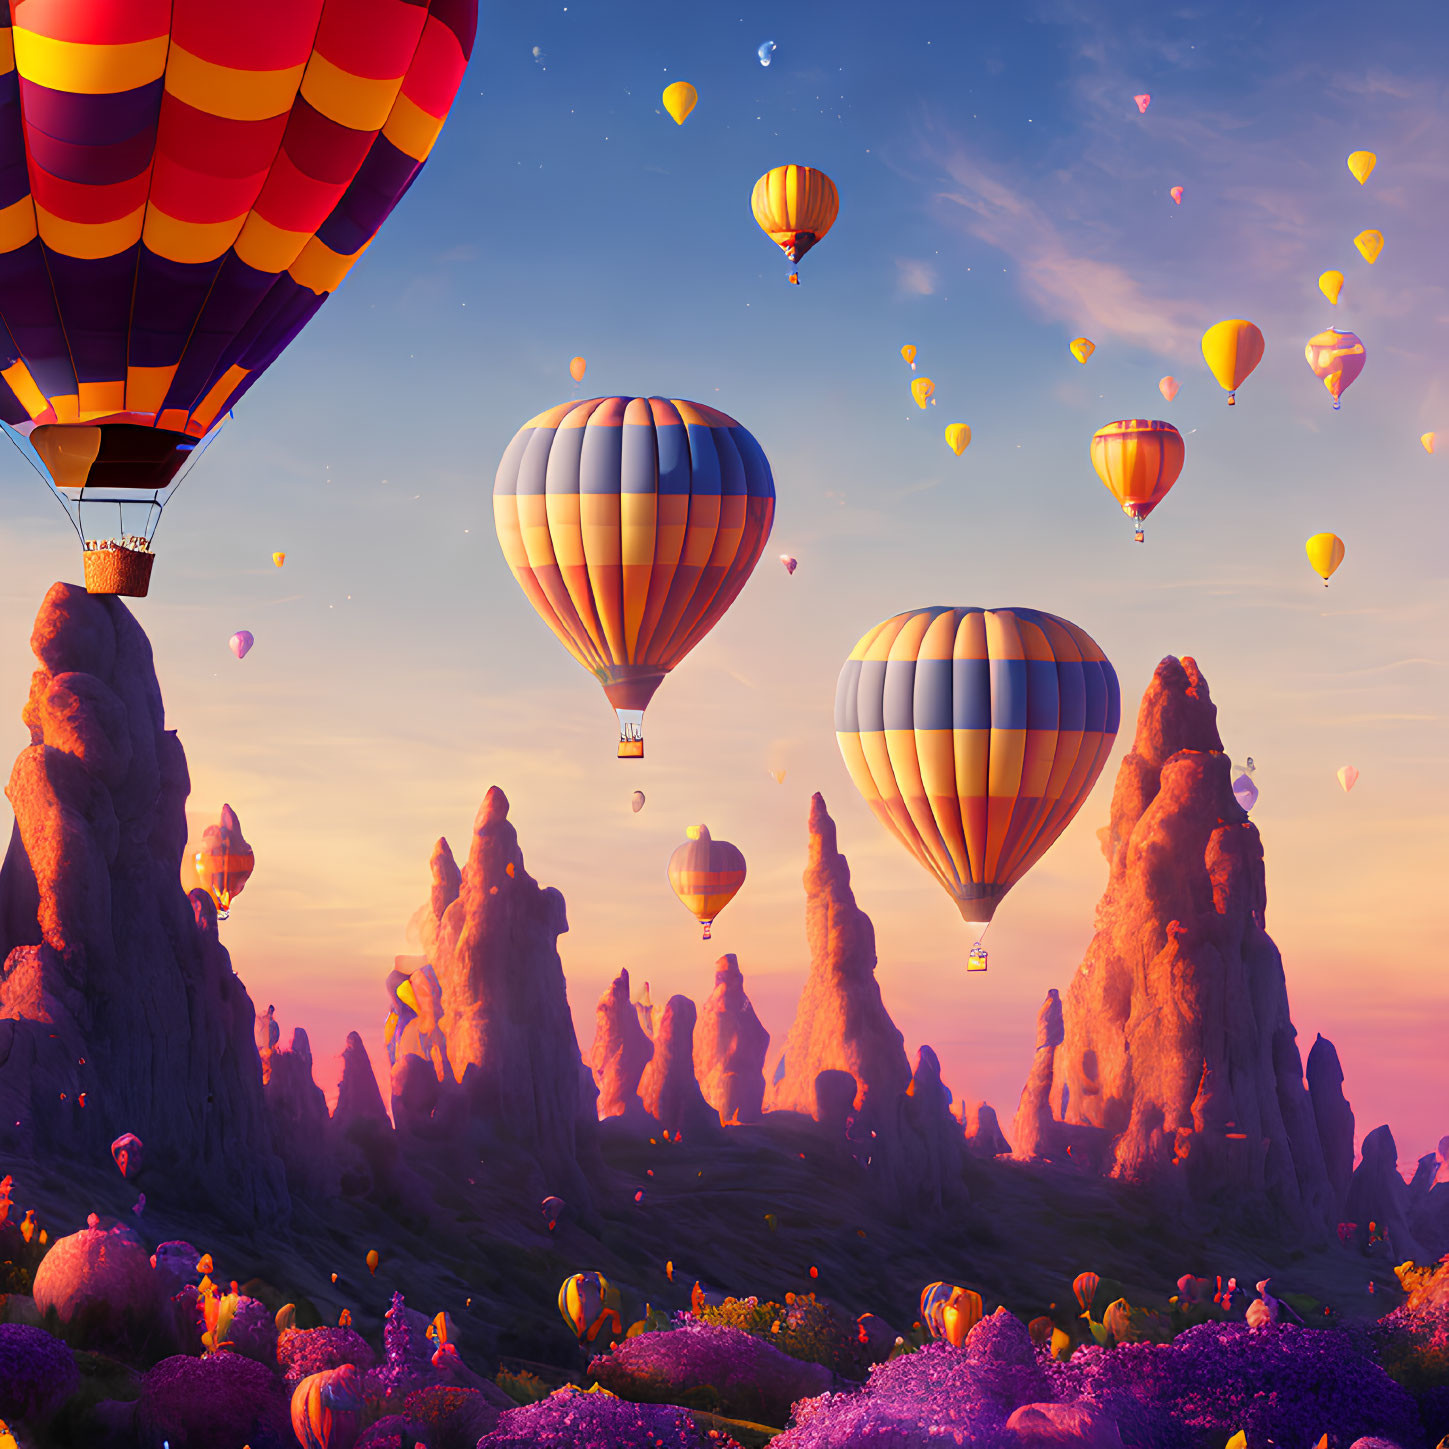 Colorful hot air balloons over whimsical sunset landscape.